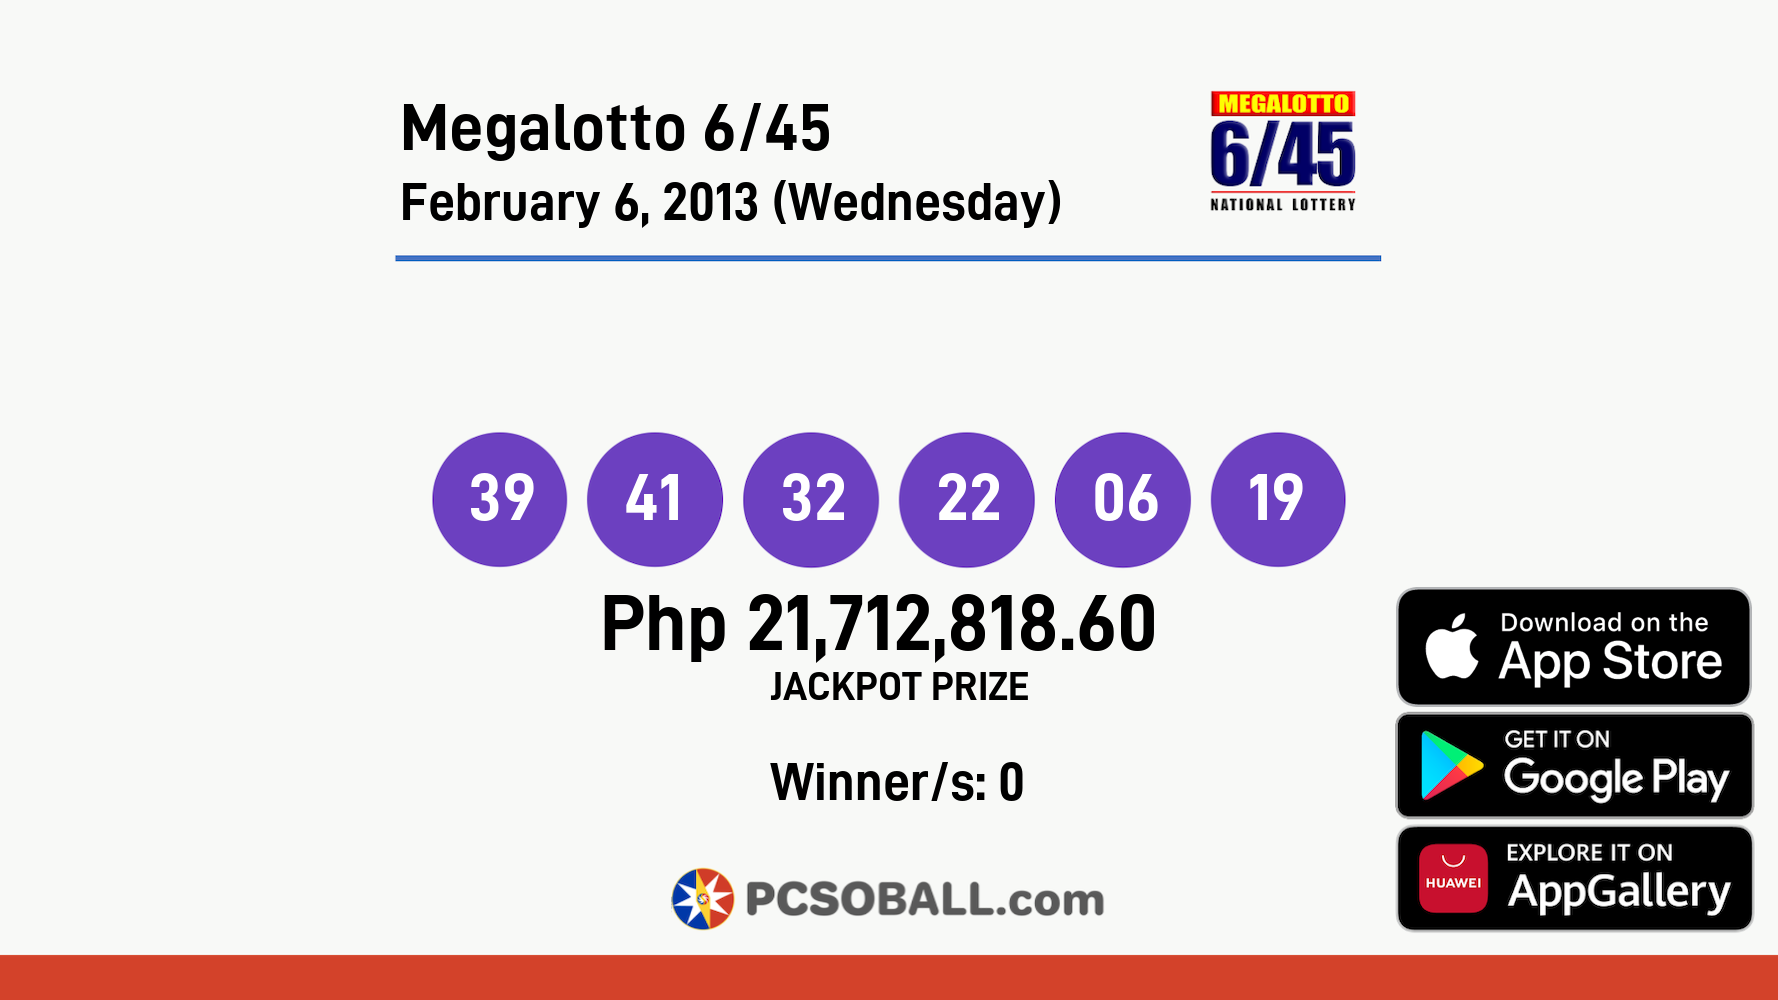 Megalotto 6/45 February 6, 2013 (Wednesday) Result